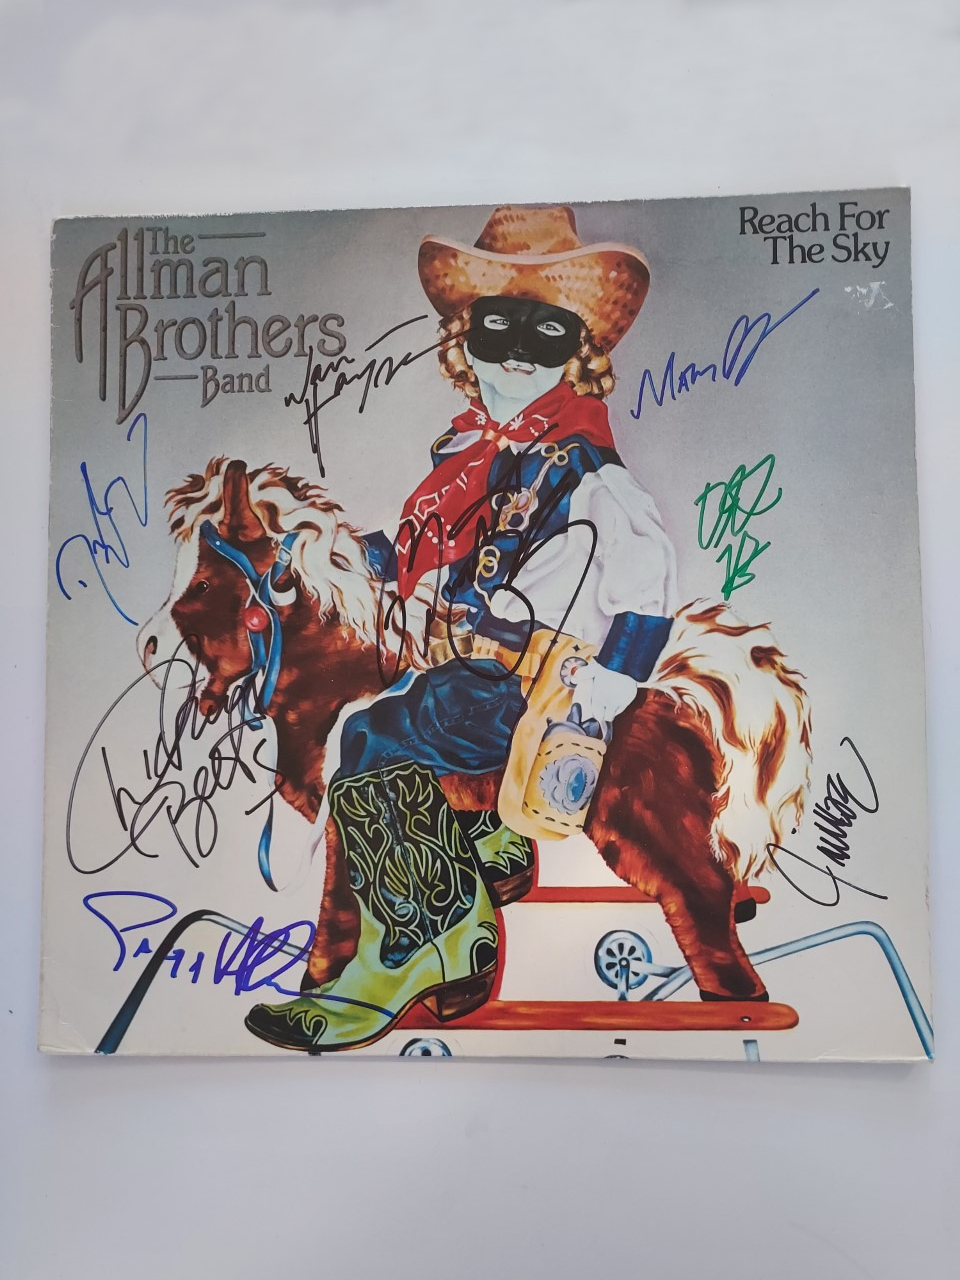 The Allman Brothers "Reach for the Sky" LP signed with proof